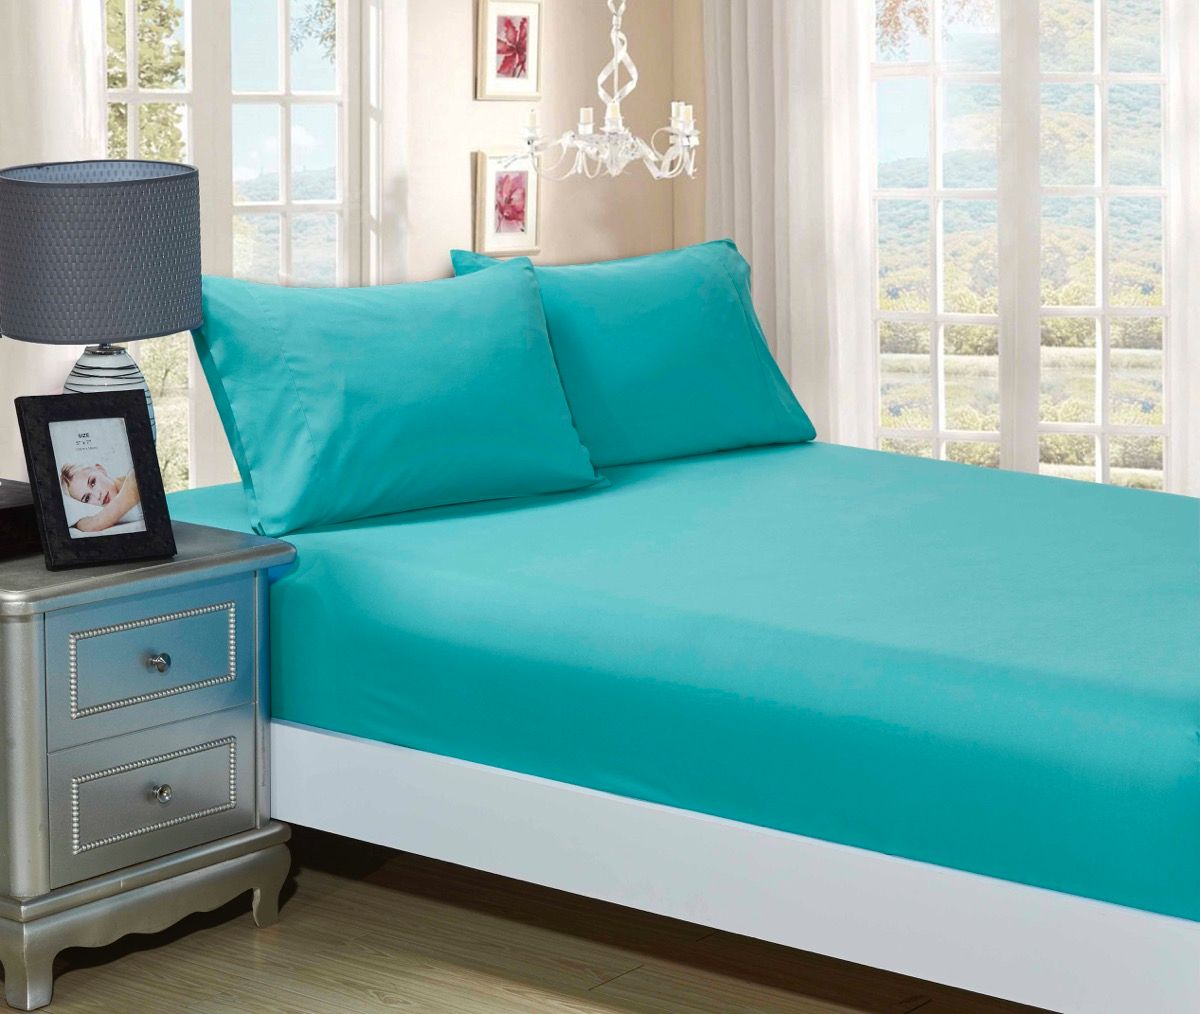 Super Soft Fitted Sheet & Pillowcase Set - King Single Size Bed - Teal